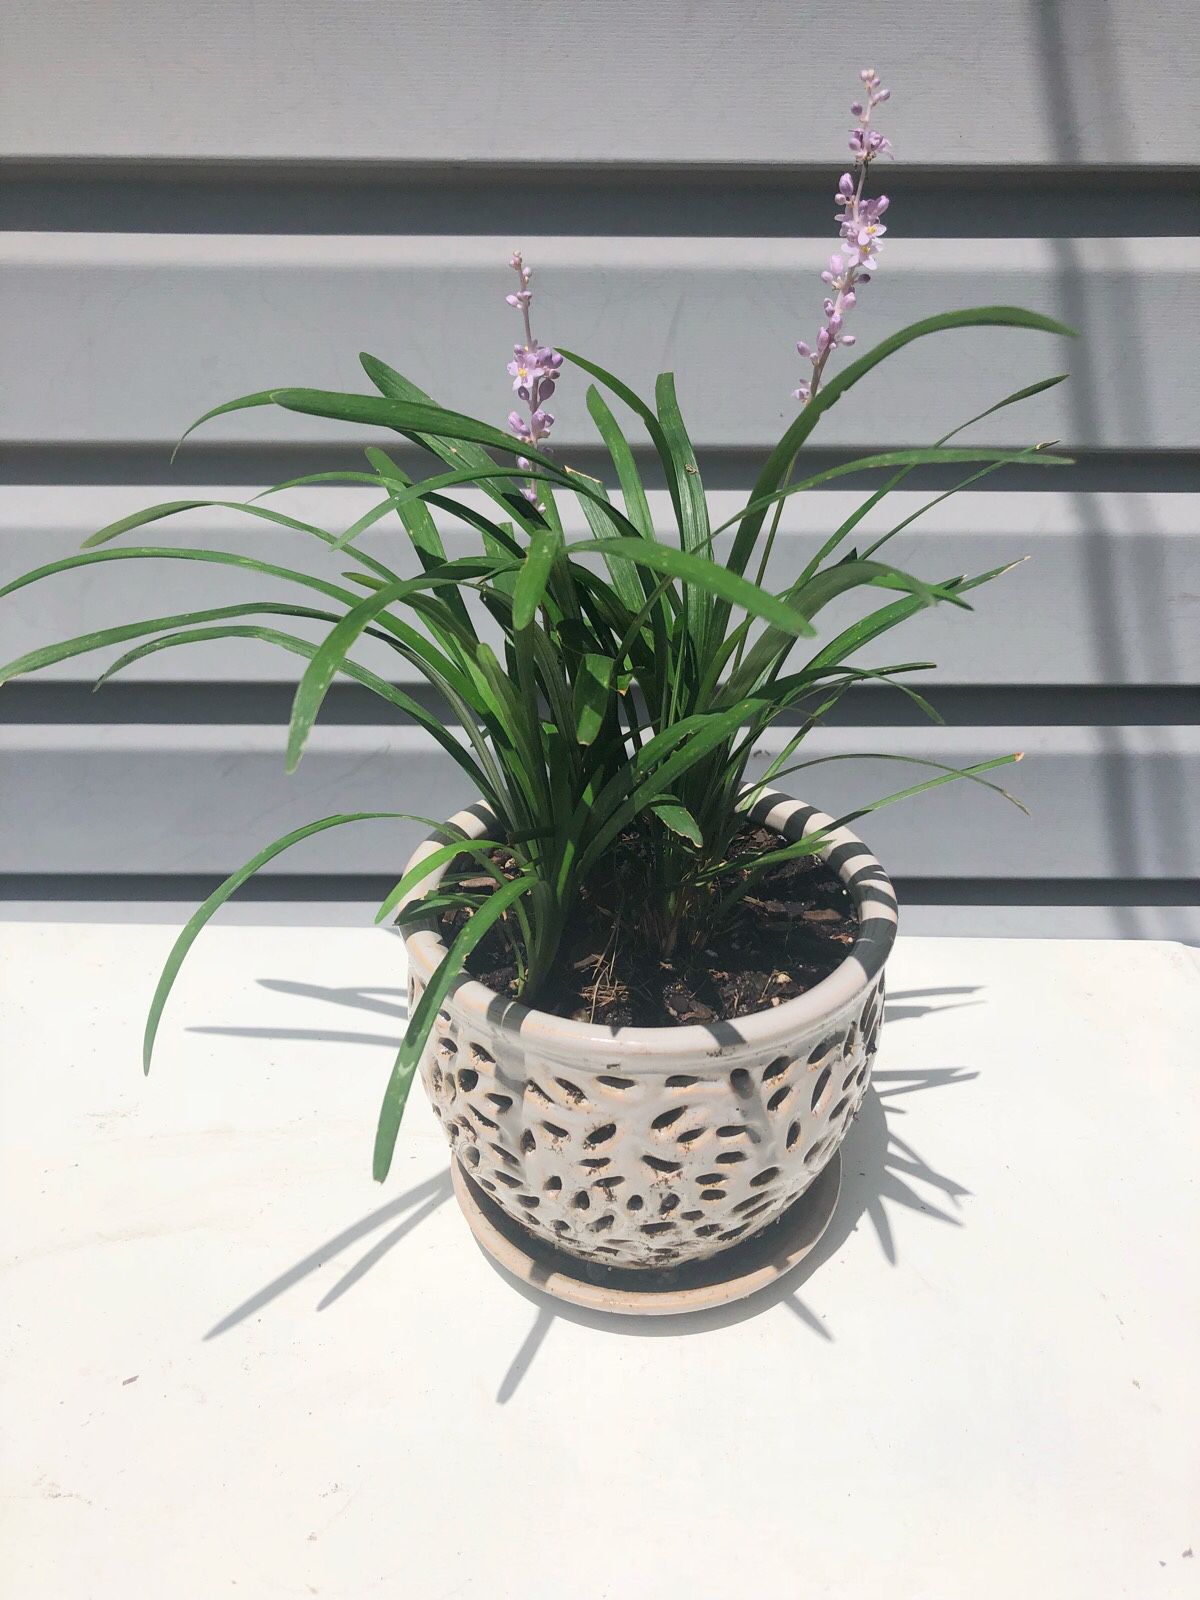 Plant with Purple Flowers in Ceramic Pot